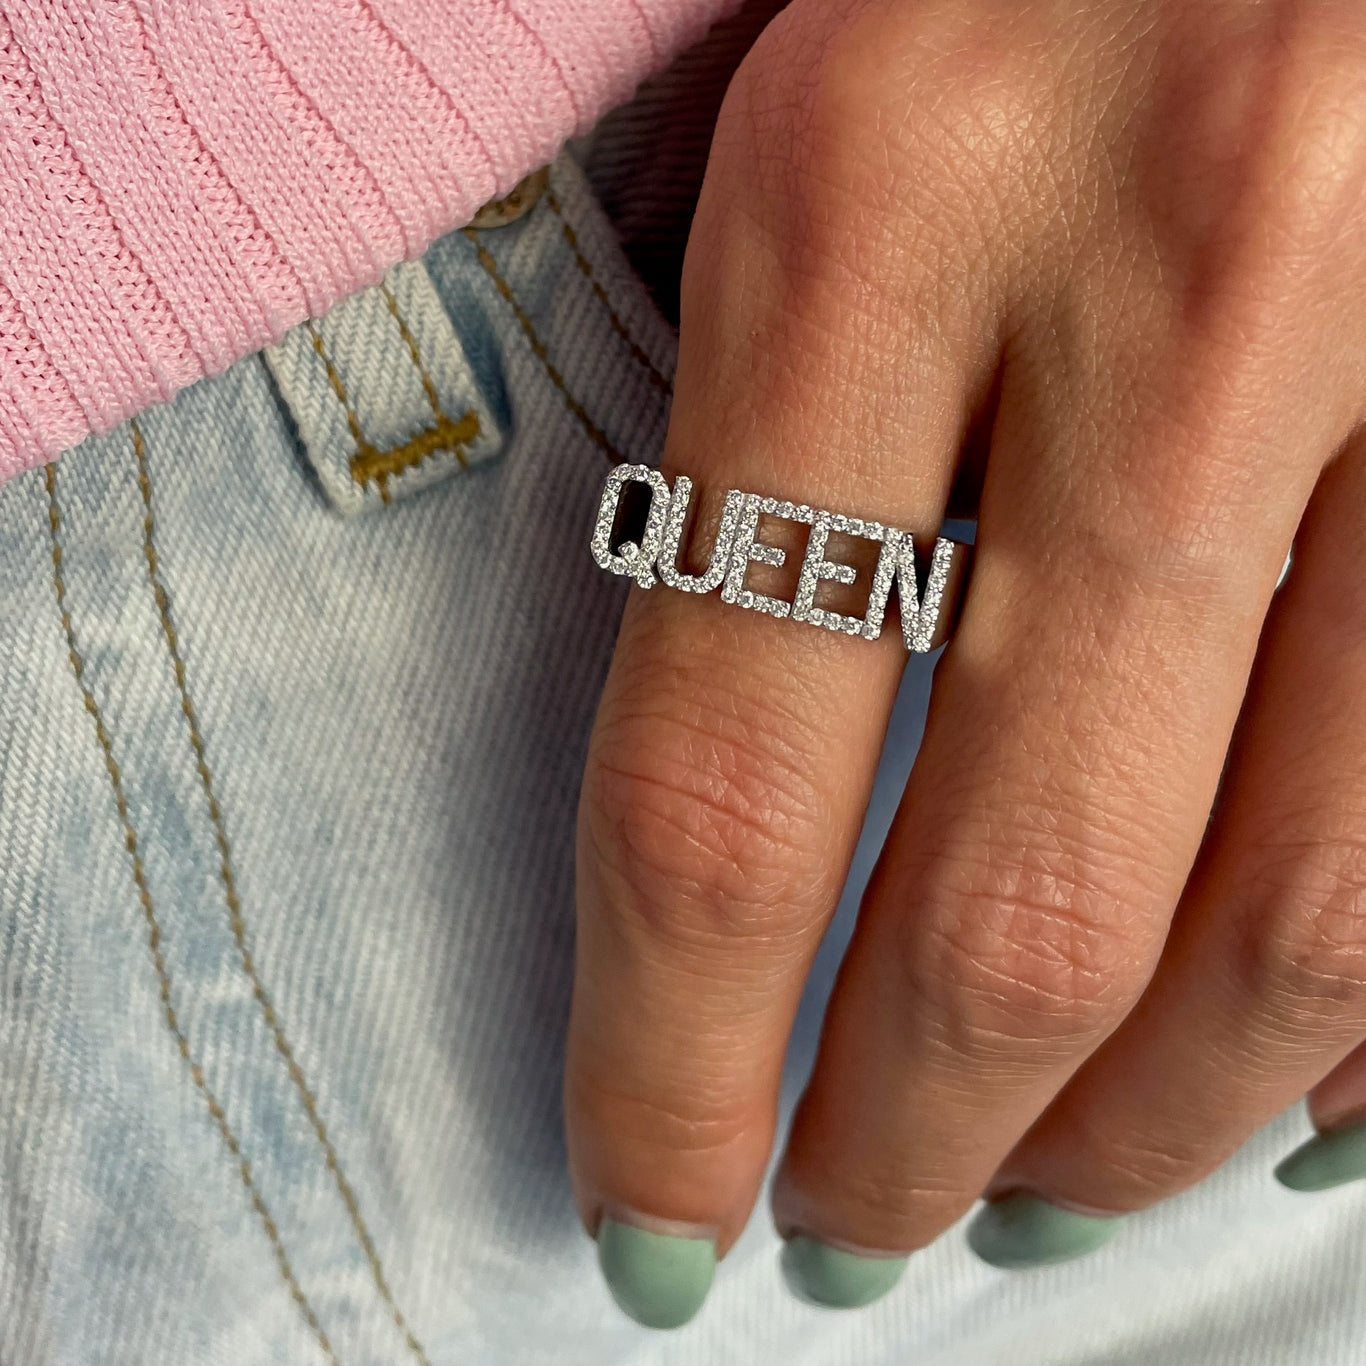 The Custom Name Ring shown with Queen monogram